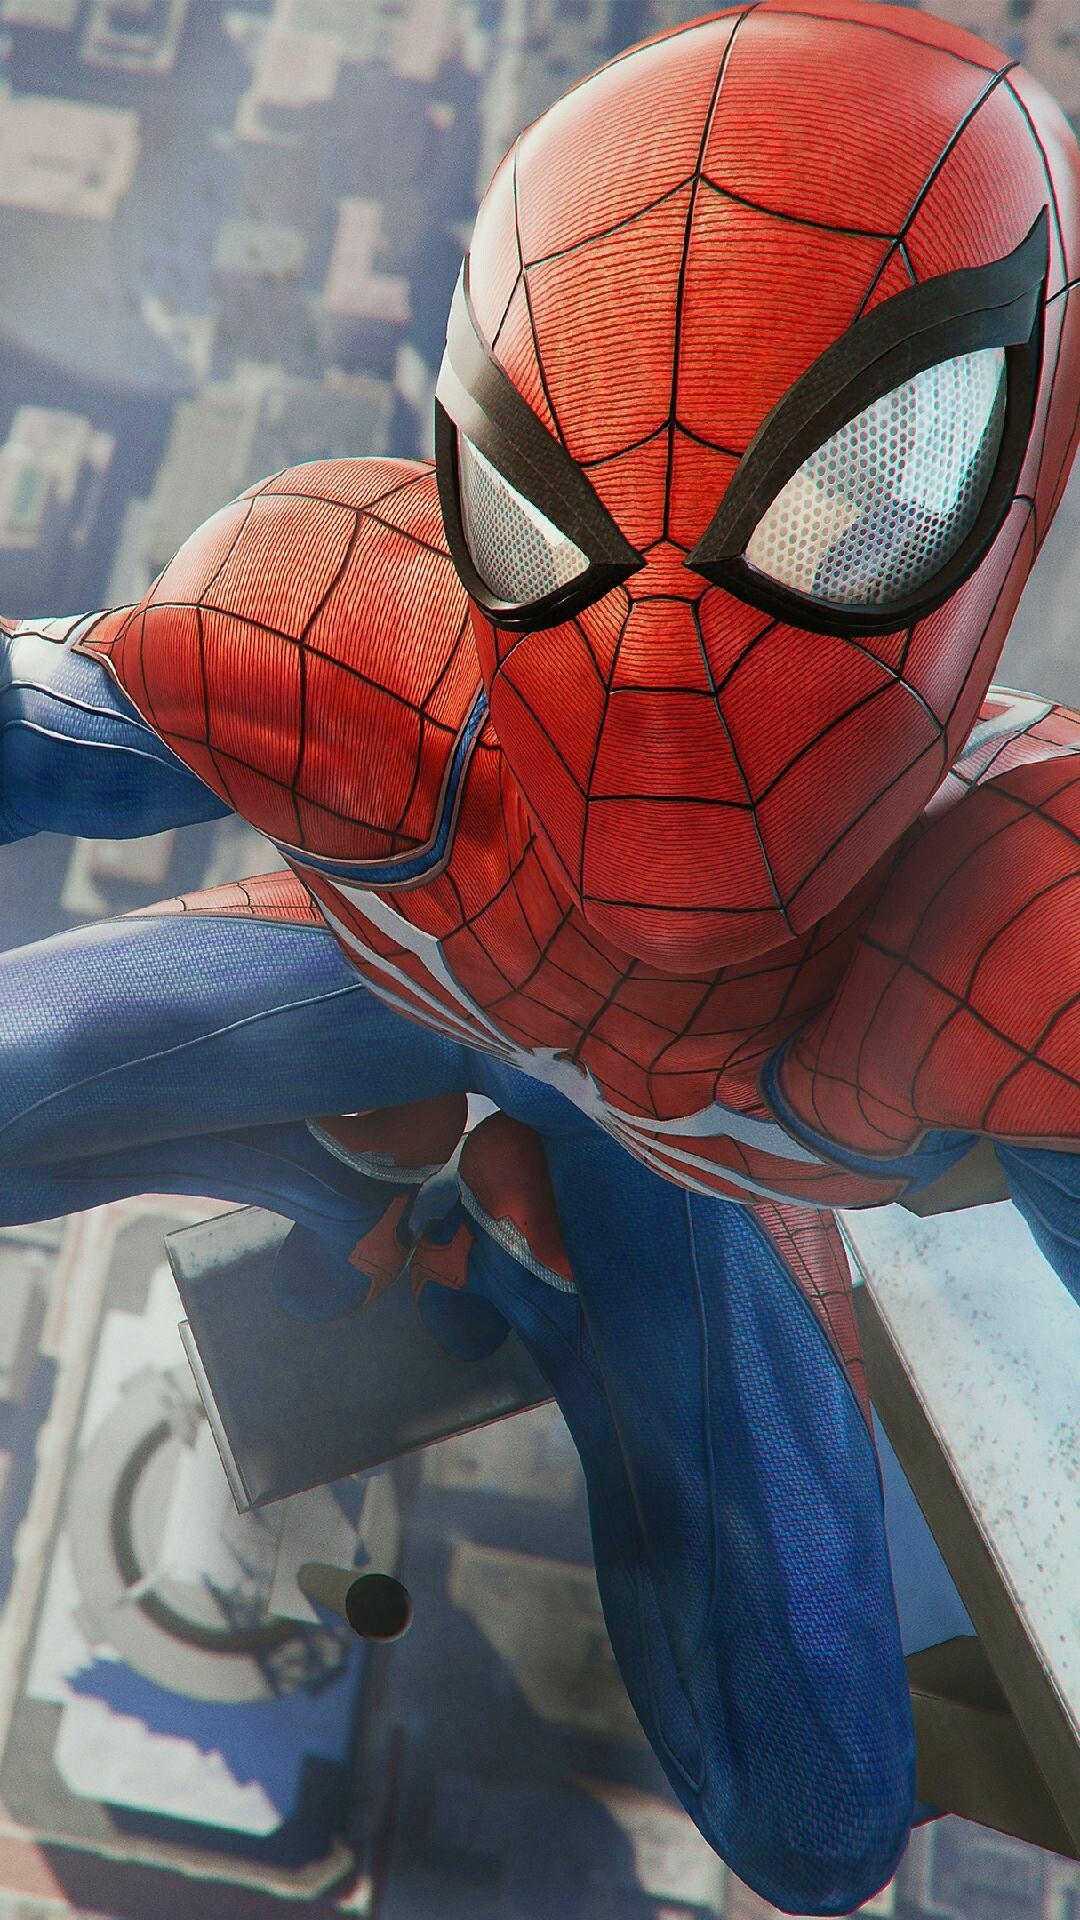 Marvel Heroes: Spider-Man, A character with spider-like abilities. 1080x1920 Full HD Wallpaper.